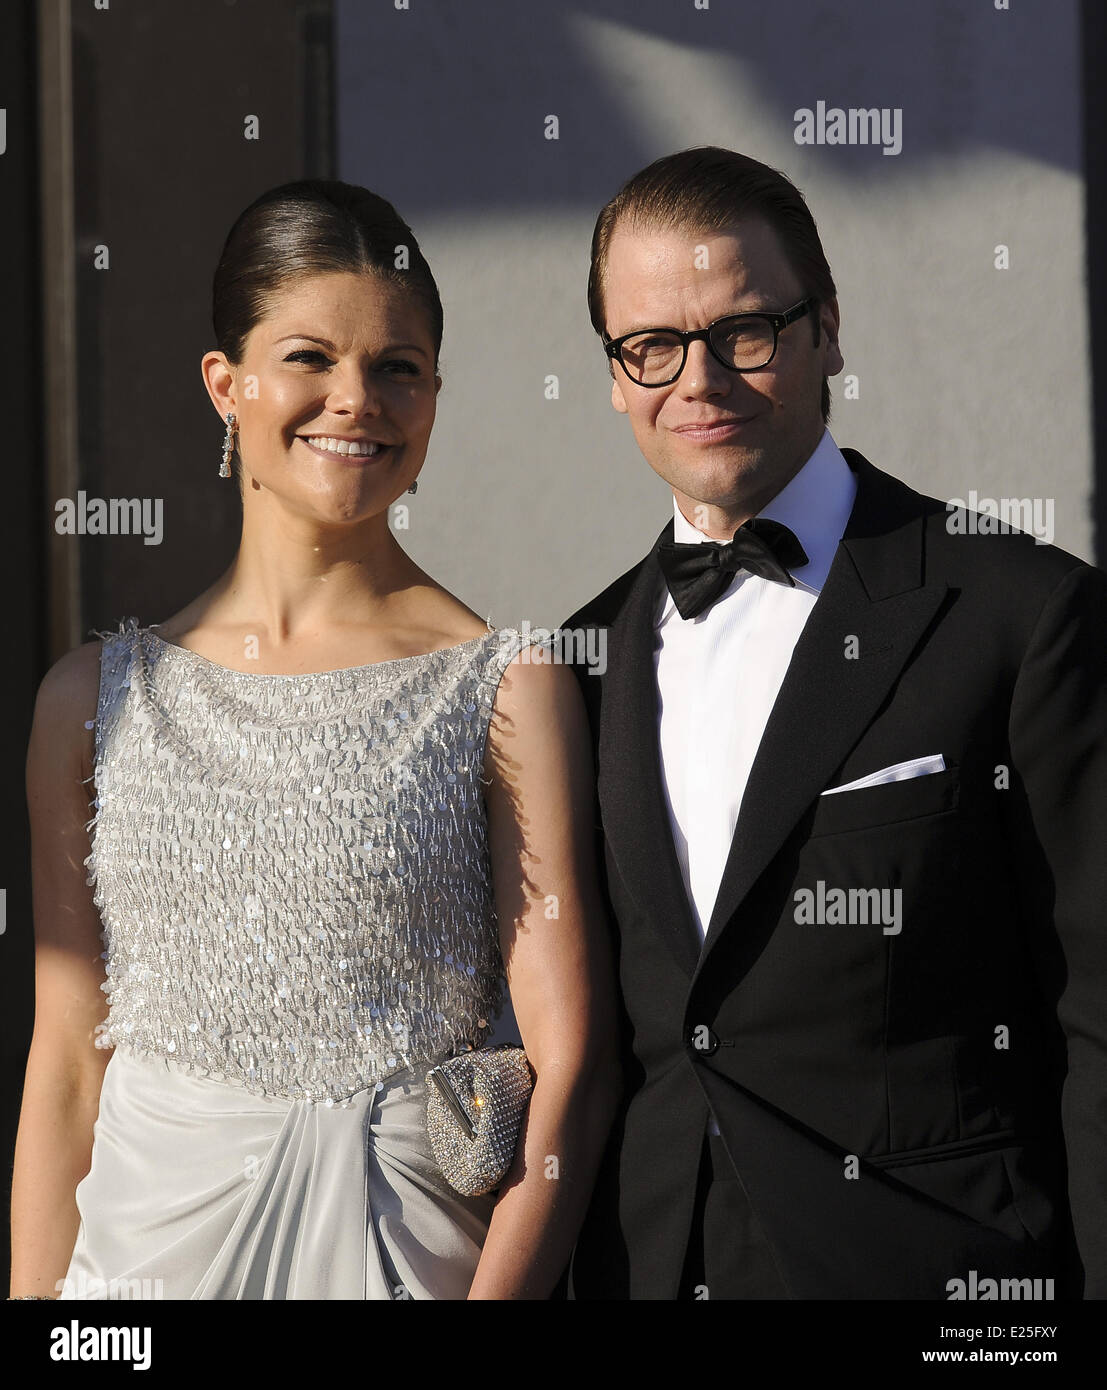 Gala dinner ahead of the wedding of Swedish Princess Madeleine and Chris O'Neill Saturday (08Jun13) - Arrivals  Featuring: Victoria,Crown Princess of Sweden,Prince Daniel,Duke of Vastergotland Where: Stockholm, Sweden When: 07 Jun 2013 Stock Photo